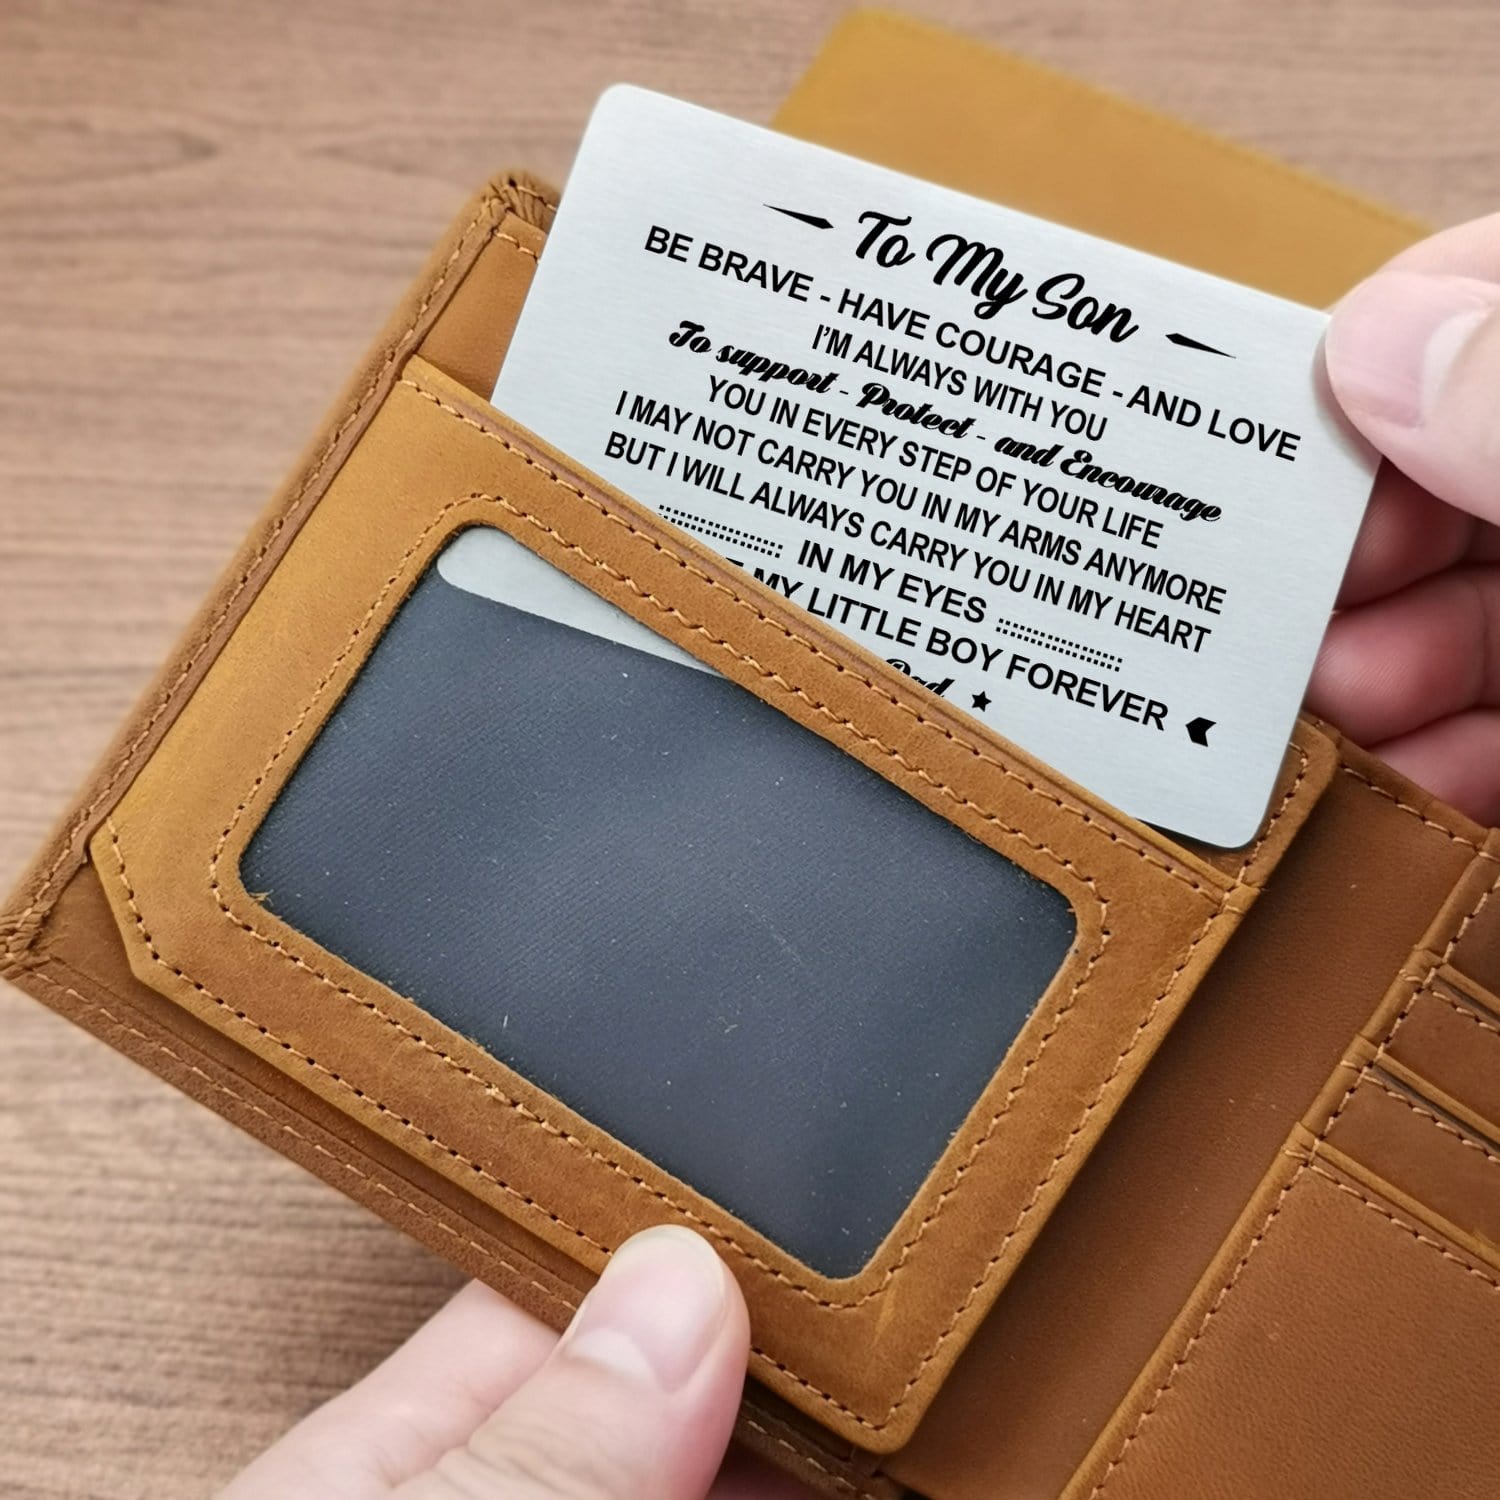 Wallets Dad To Son - You Are My Little Boy Forever Bifold Leather Wallet Gift Card GiveMe-Gifts